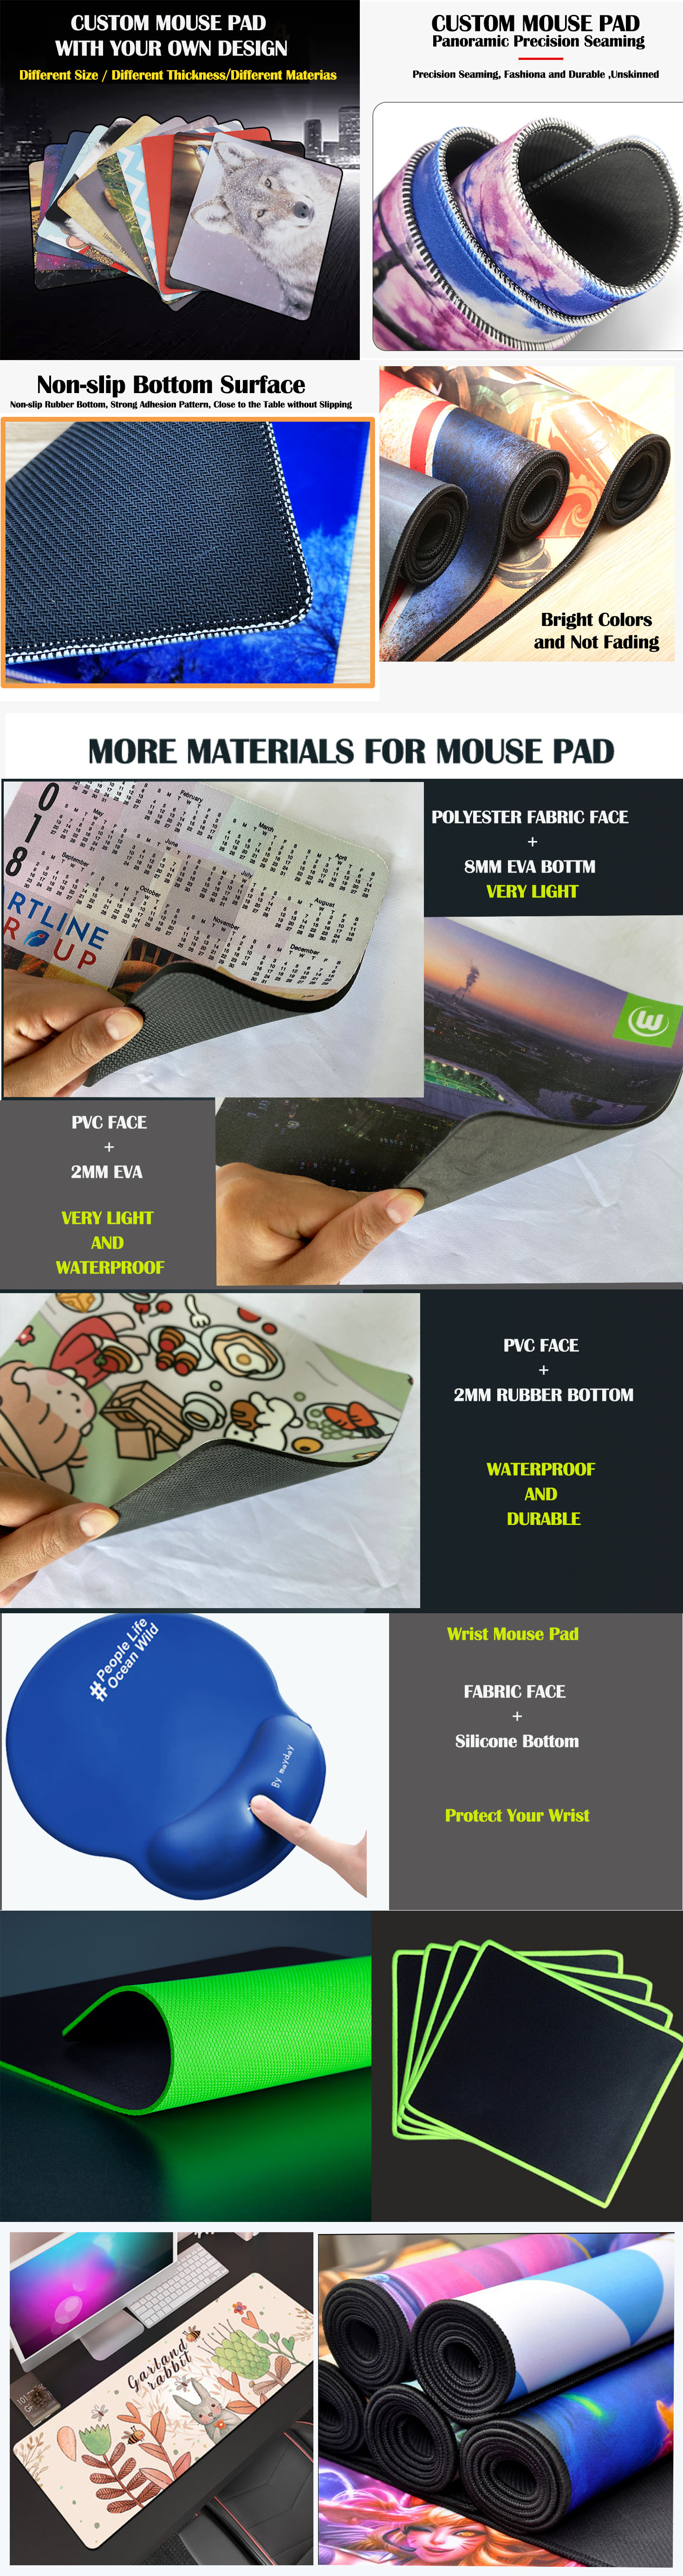 Factory Price Custom Mouse Pad Print Sublimation Mouse Pads or Screen Printed Custom Logo Print Mouse Pads for Promotion Gifts